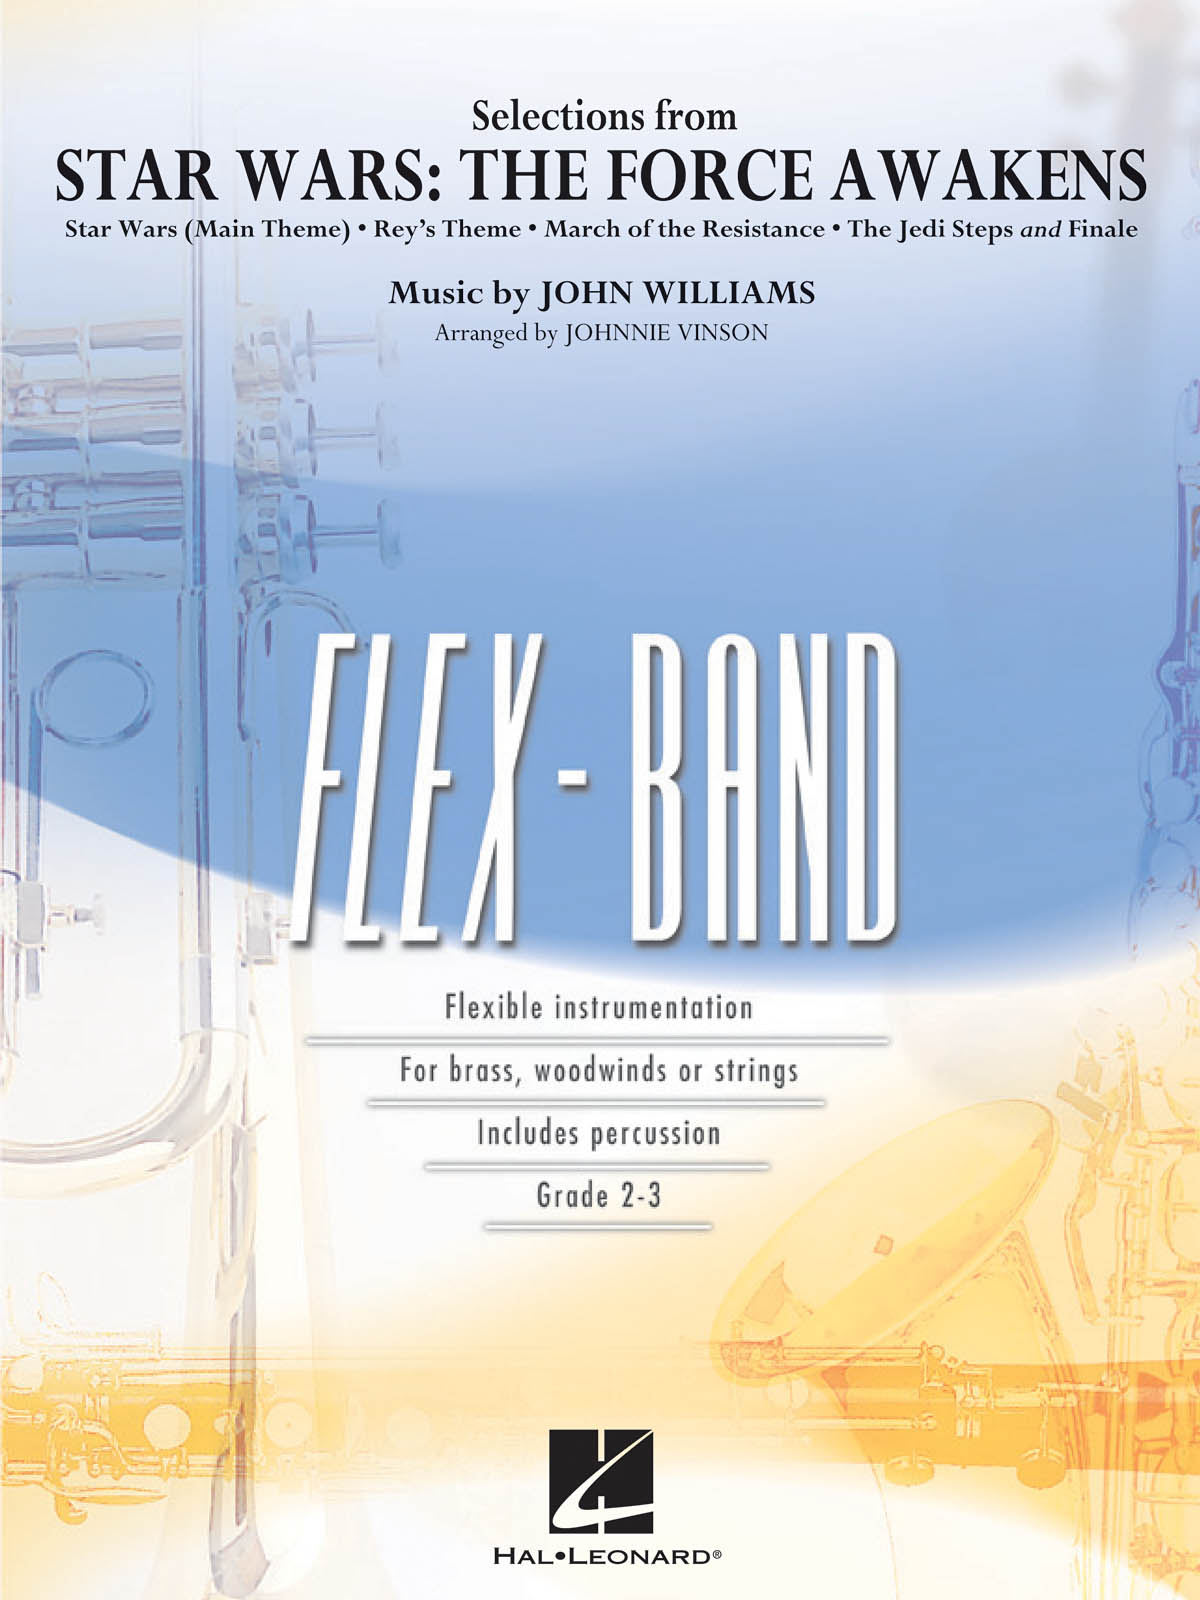 John Williams: Selections from Star Wars: The Force Awakens: Concert Band: Score